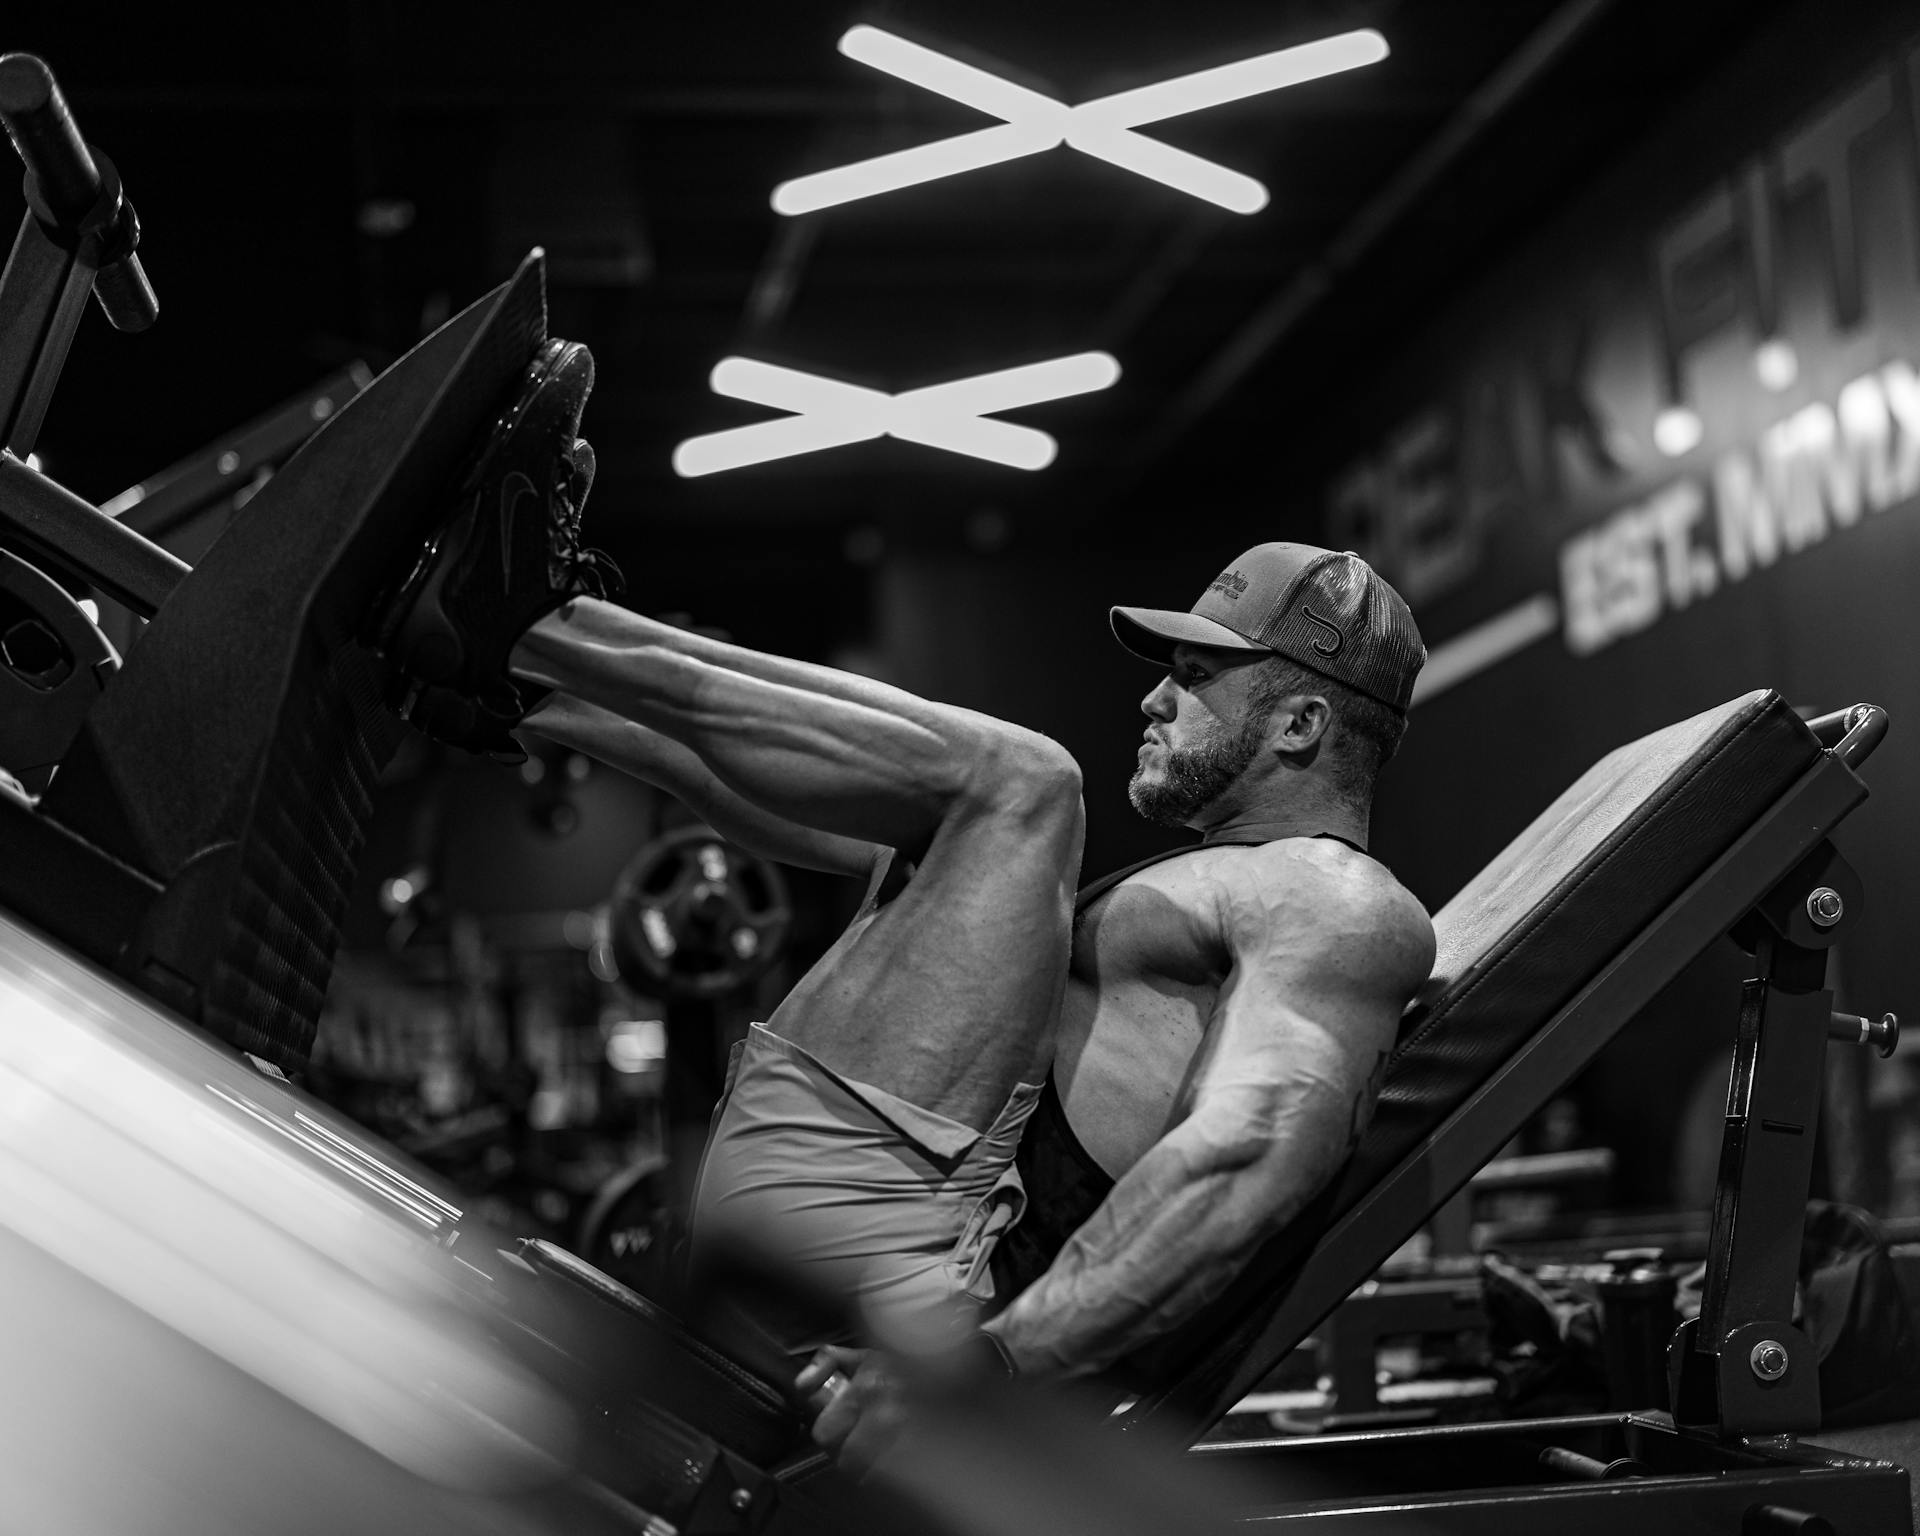 black and white image of man in gym wearing hat and shorts performing leg press exericse on machine